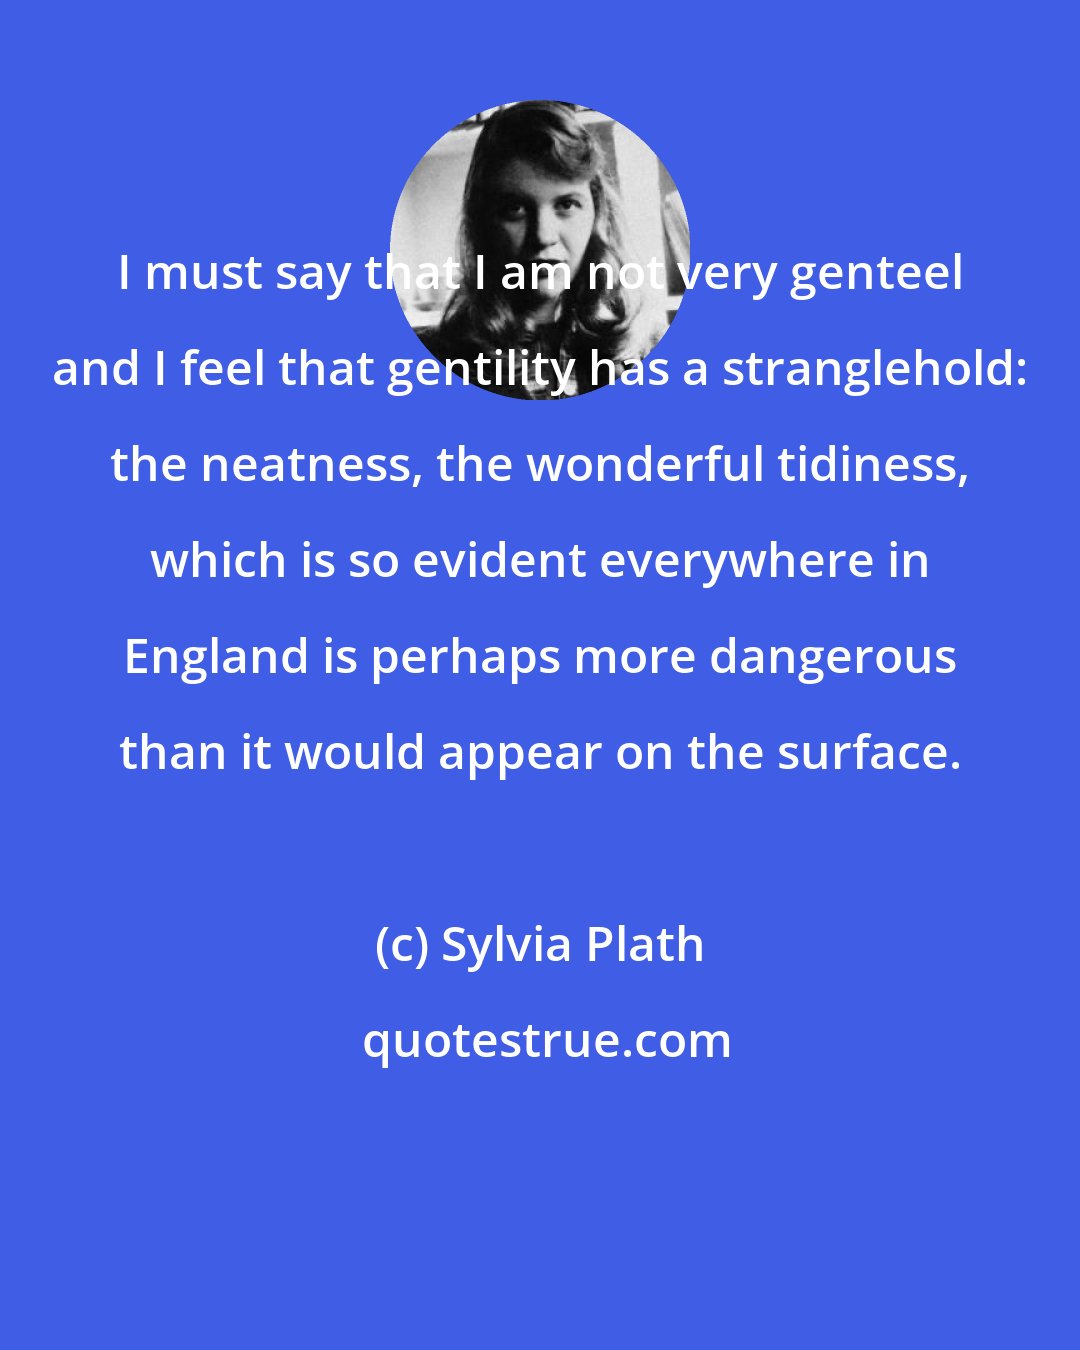 Sylvia Plath: I must say that I am not very genteel and I feel that gentility has a stranglehold: the neatness, the wonderful tidiness, which is so evident everywhere in England is perhaps more dangerous than it would appear on the surface.